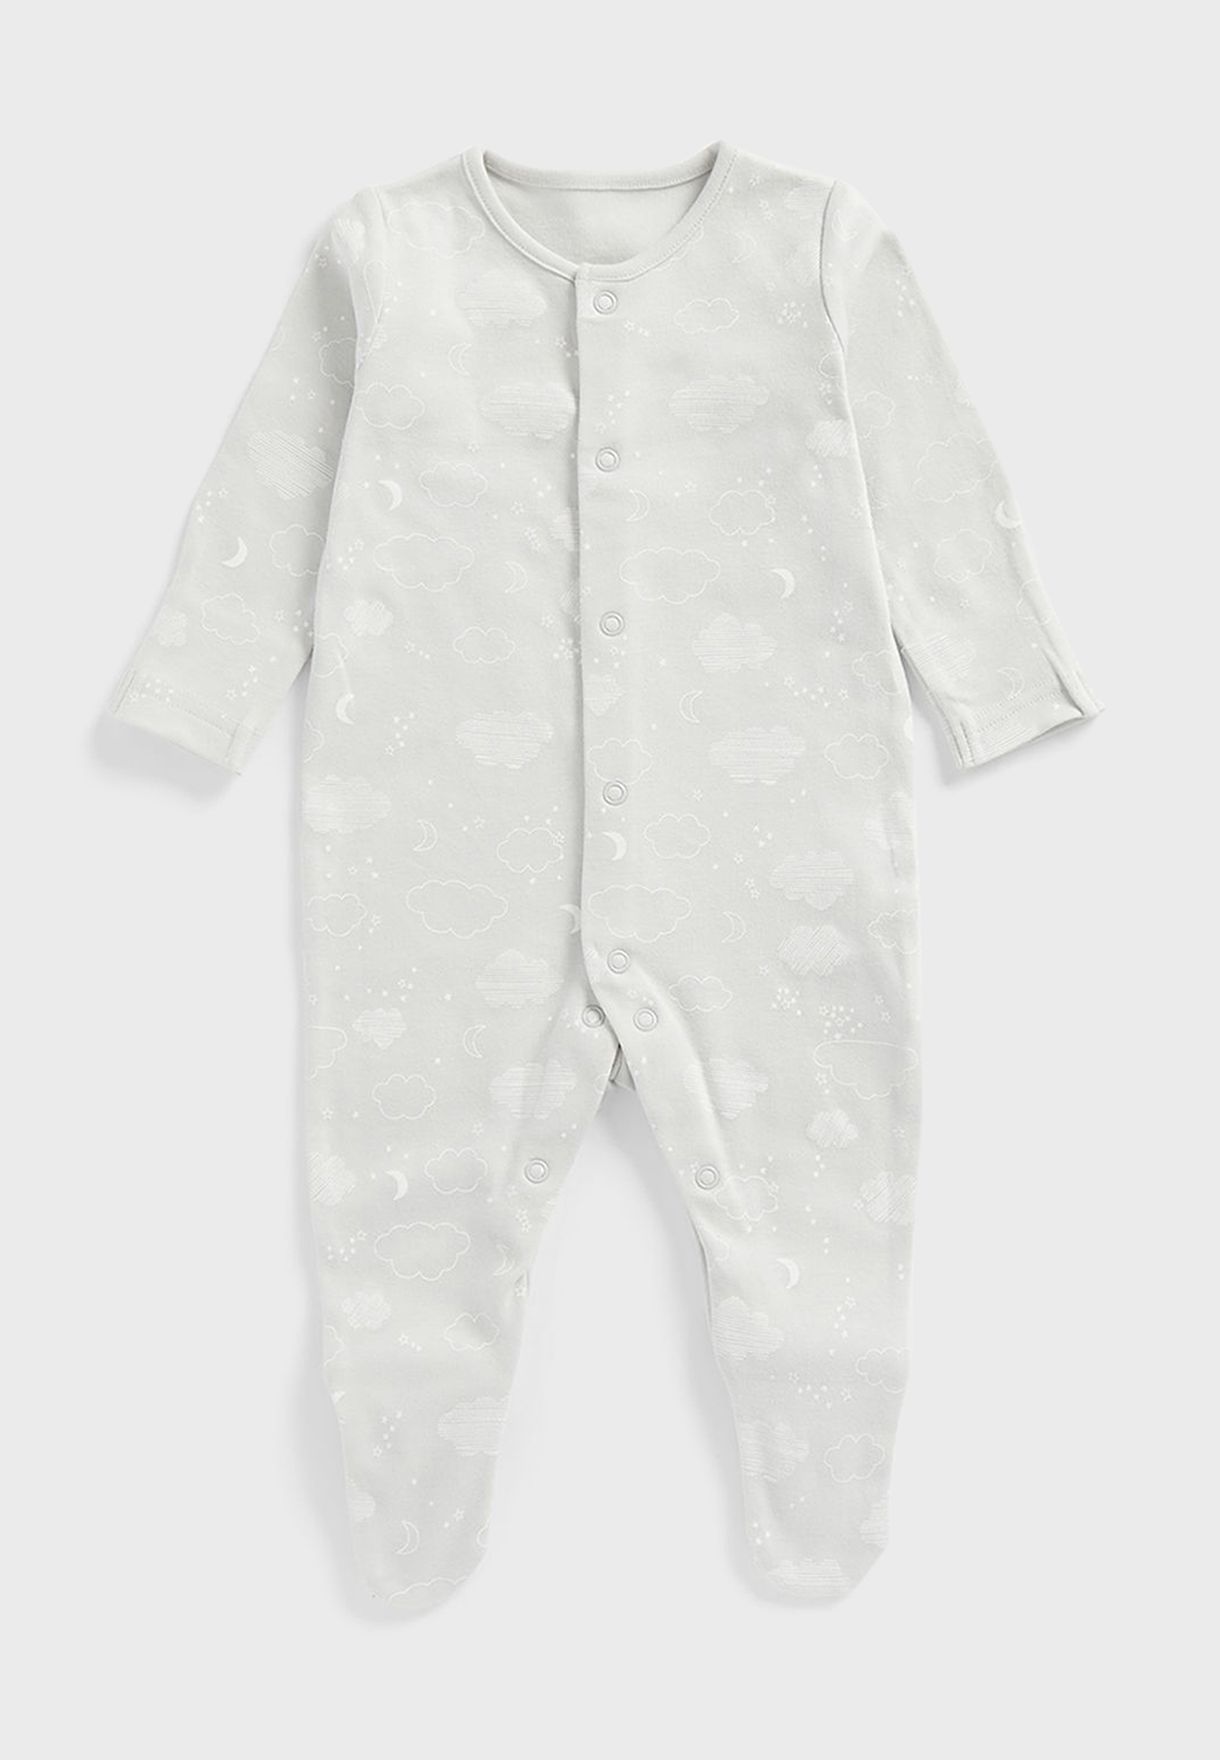 Infant 3 Pack Assorted Onesies